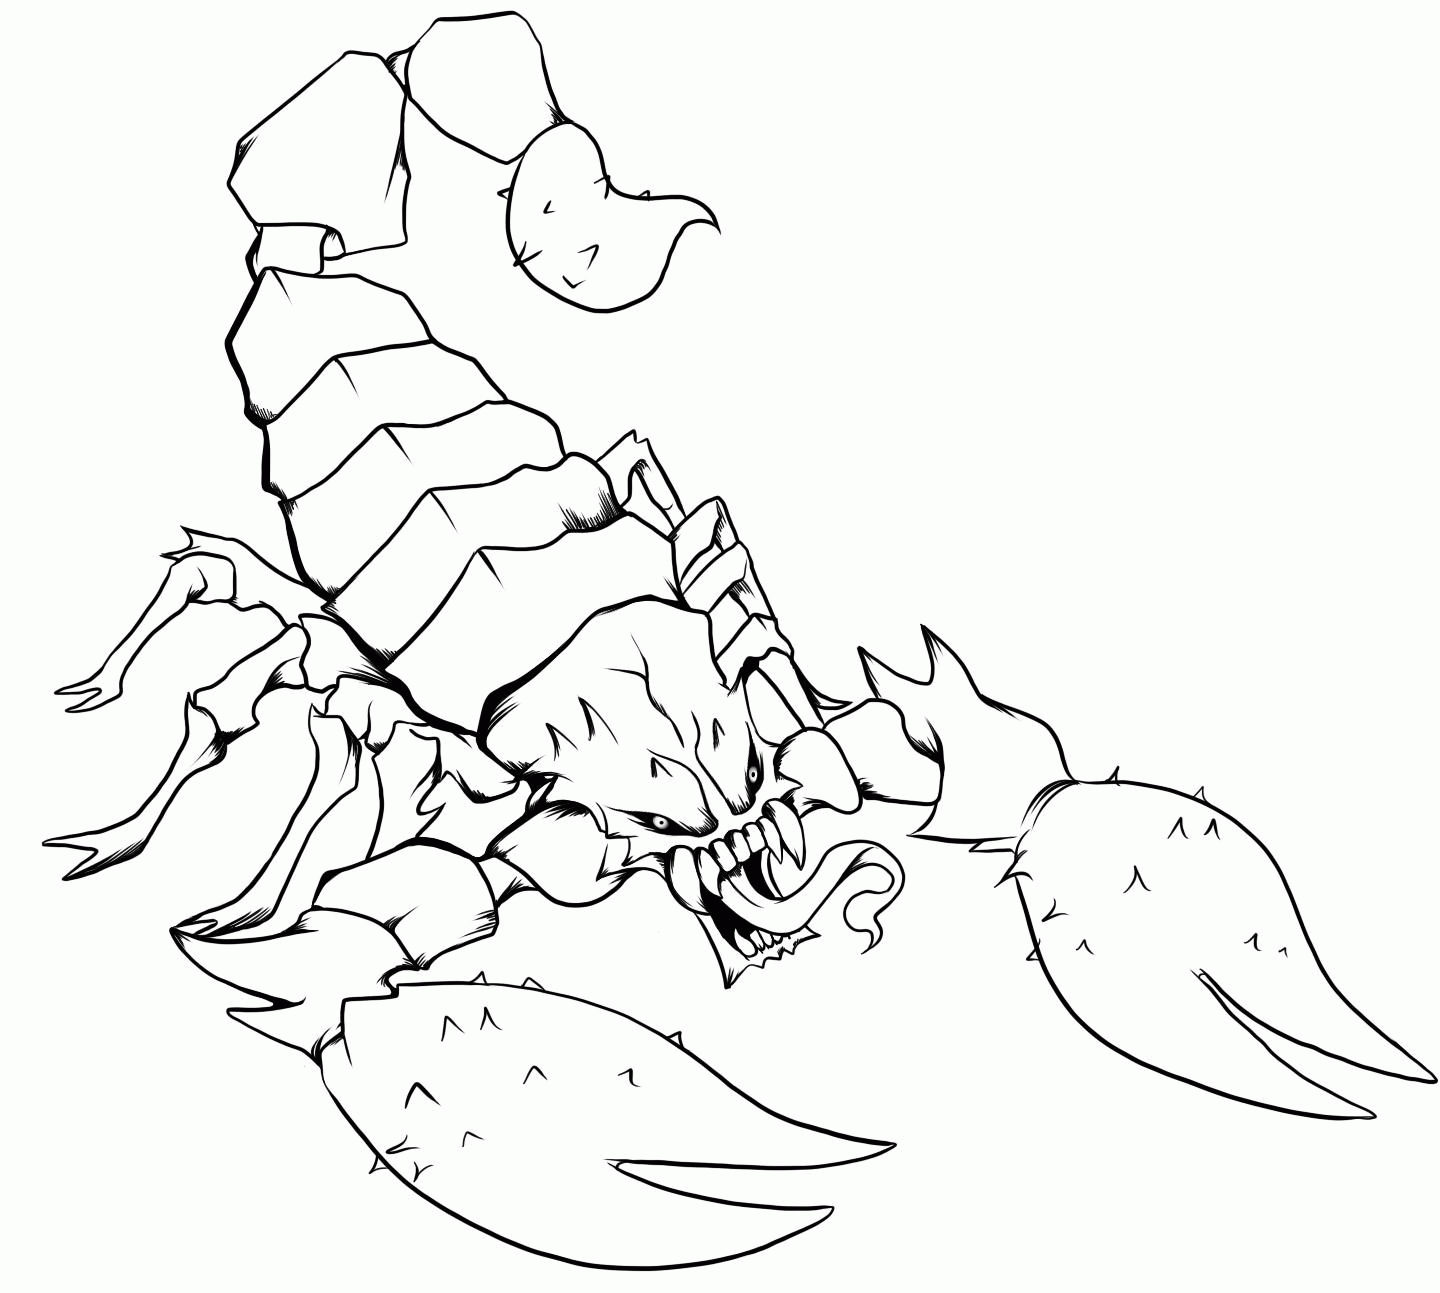 Scorpions Coloring Pages Coloring Home Get up close and personal with this scary scorpion at joshua tree national park! scorpions coloring pages coloring home